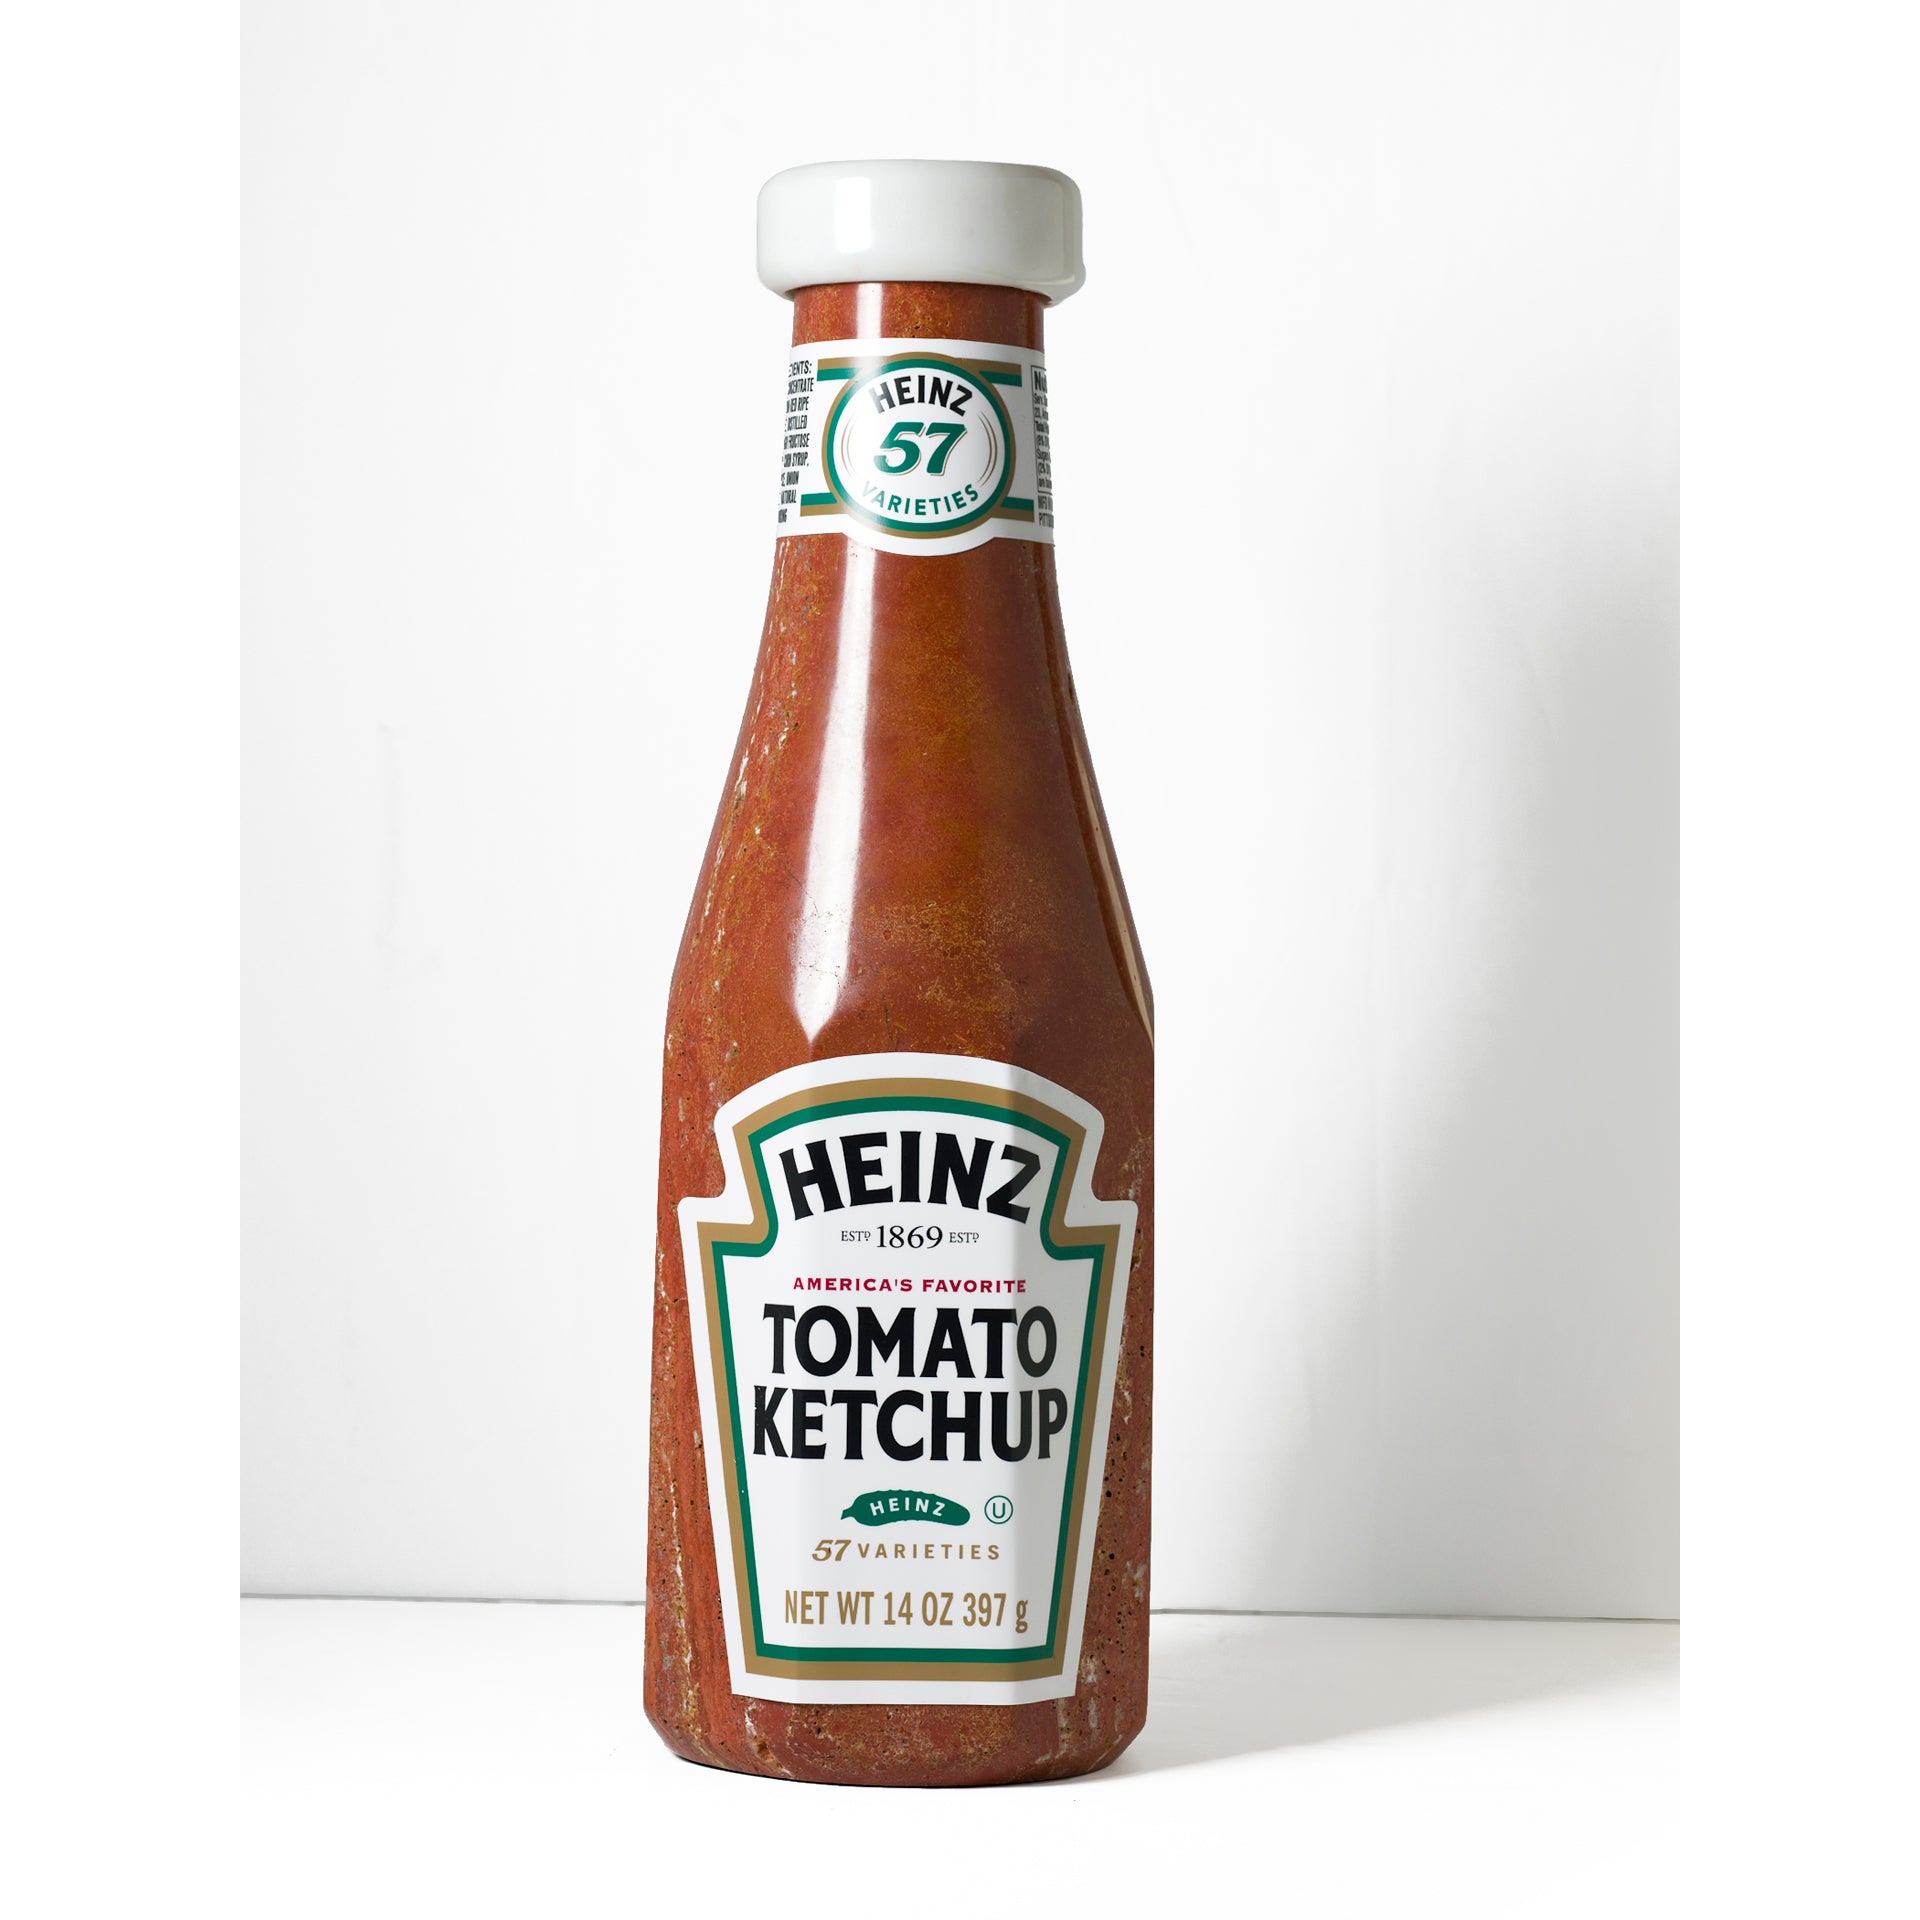 Heinz Ketchup carved out of marble